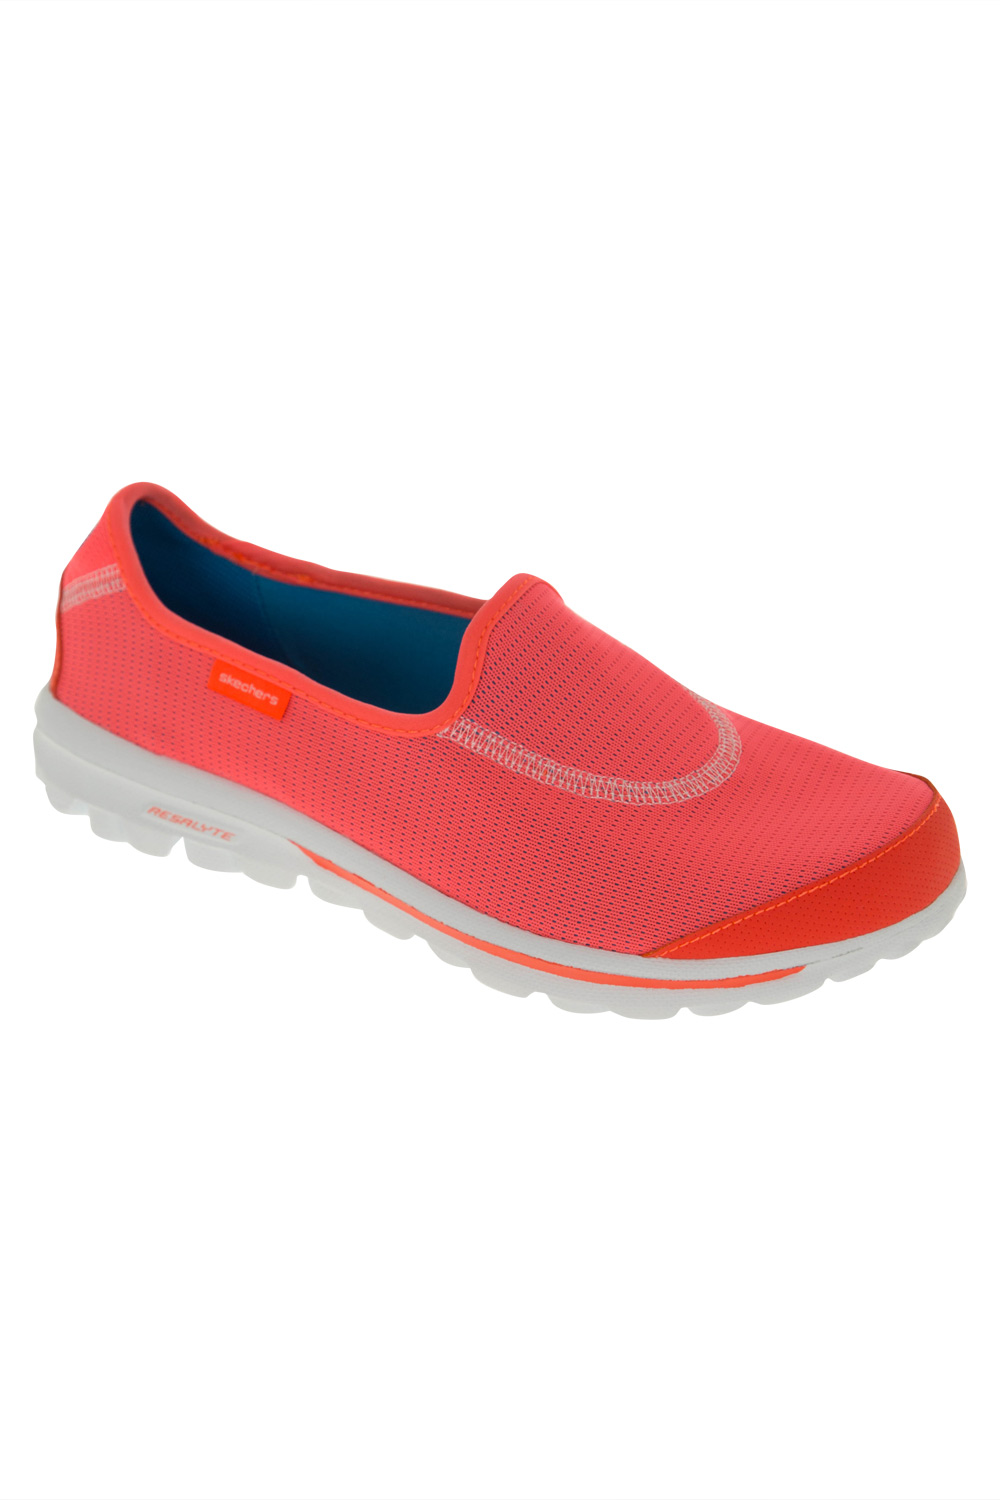 skechers go walk recovery coral